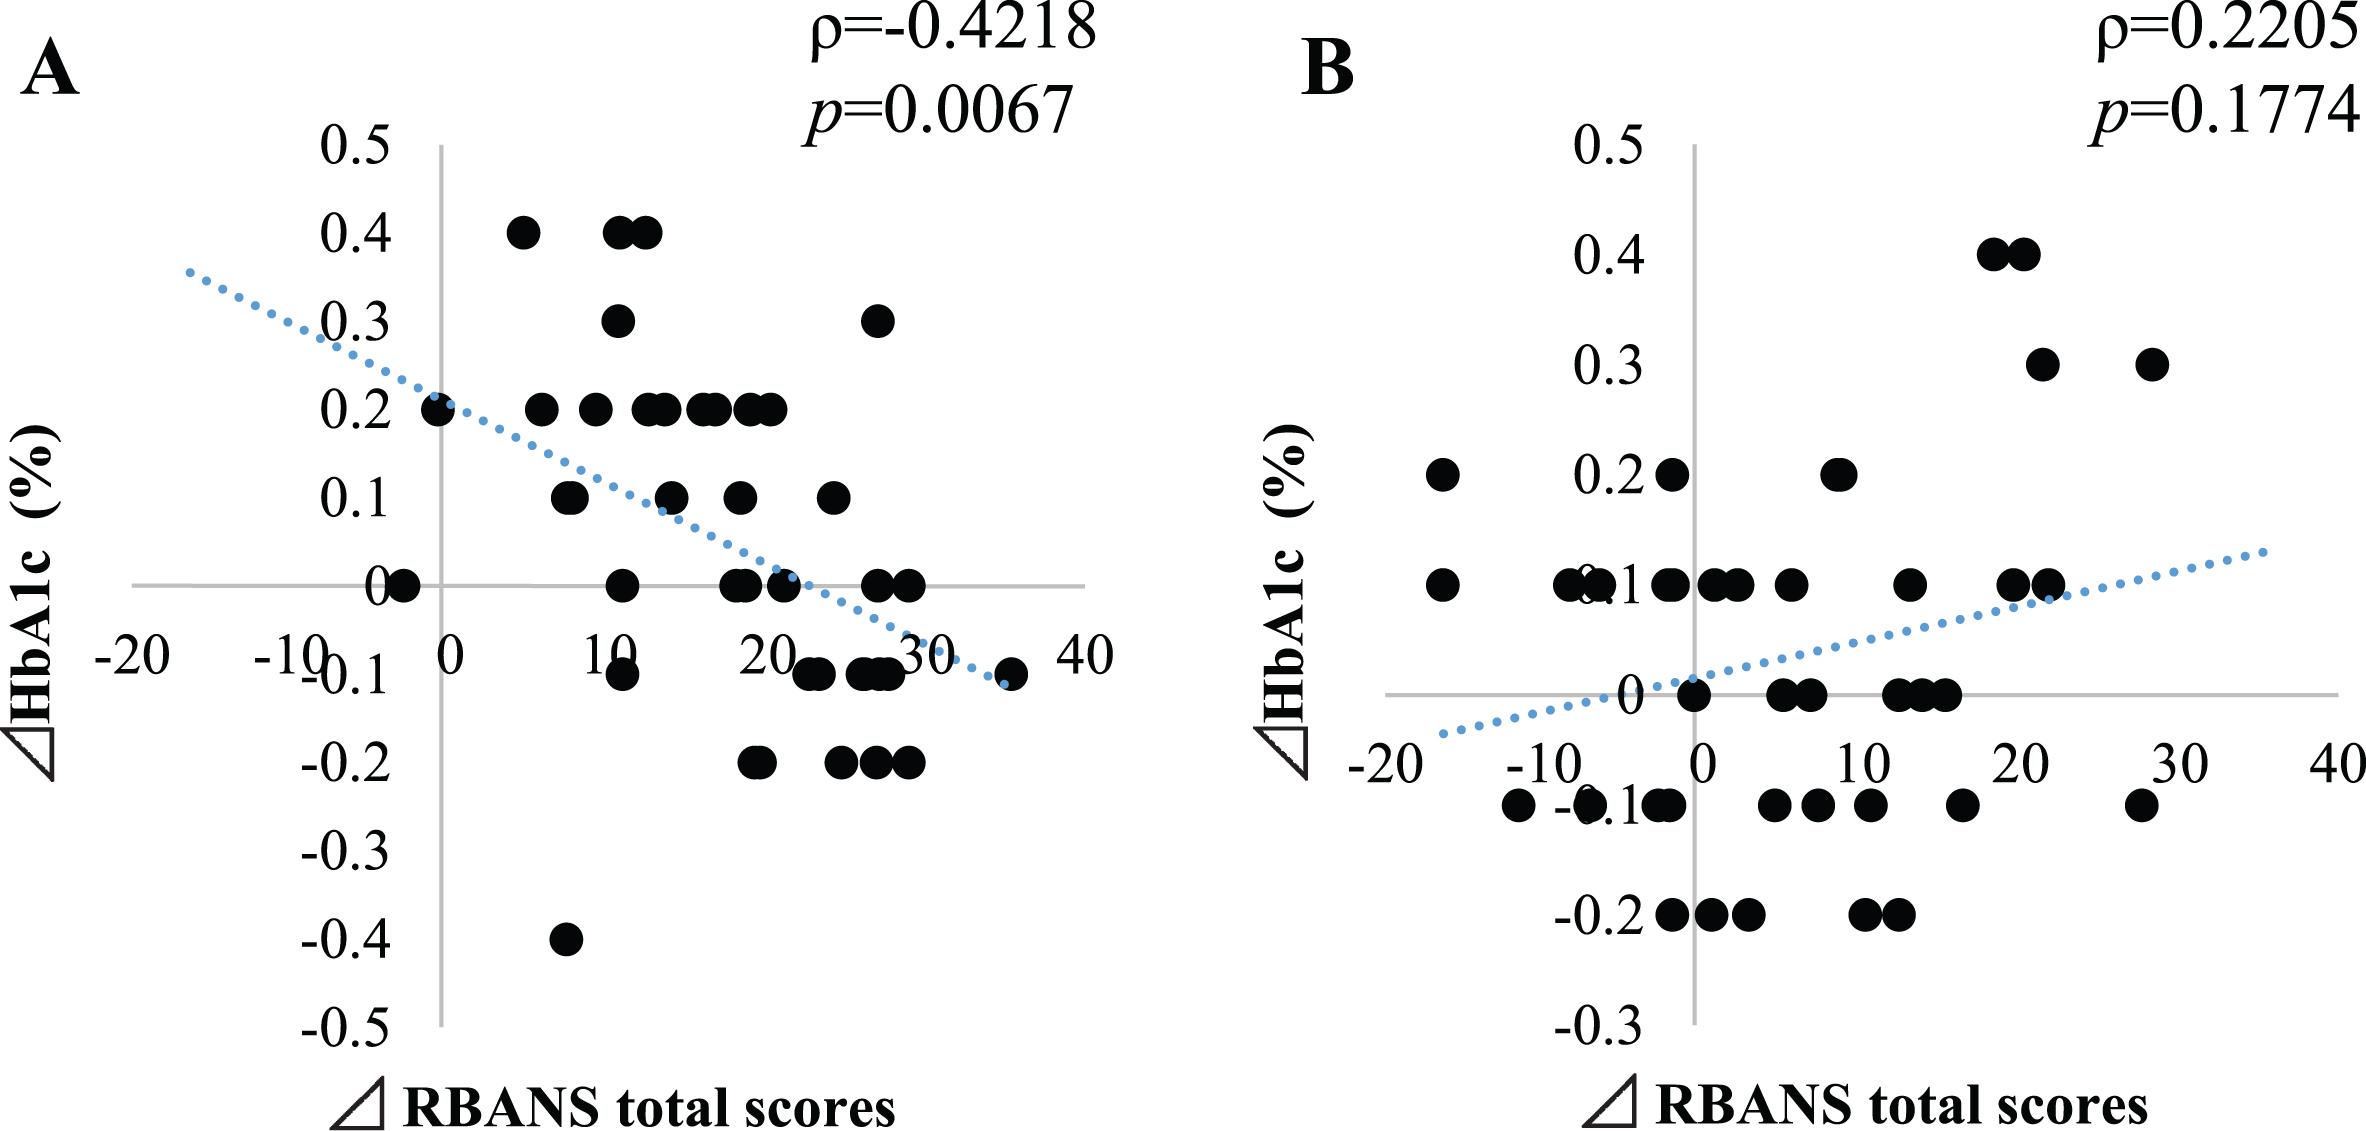 Correlation between changes of RBANS total scores with HbA1c of probiotic group (A) and placebo group (B). Y-axis represents percentage change in HbA1c and the X-axis represents the changes in RBANS total score. ρ represents the rho correlation and p represents the statistical significance of the correlation (Pearson analysis).